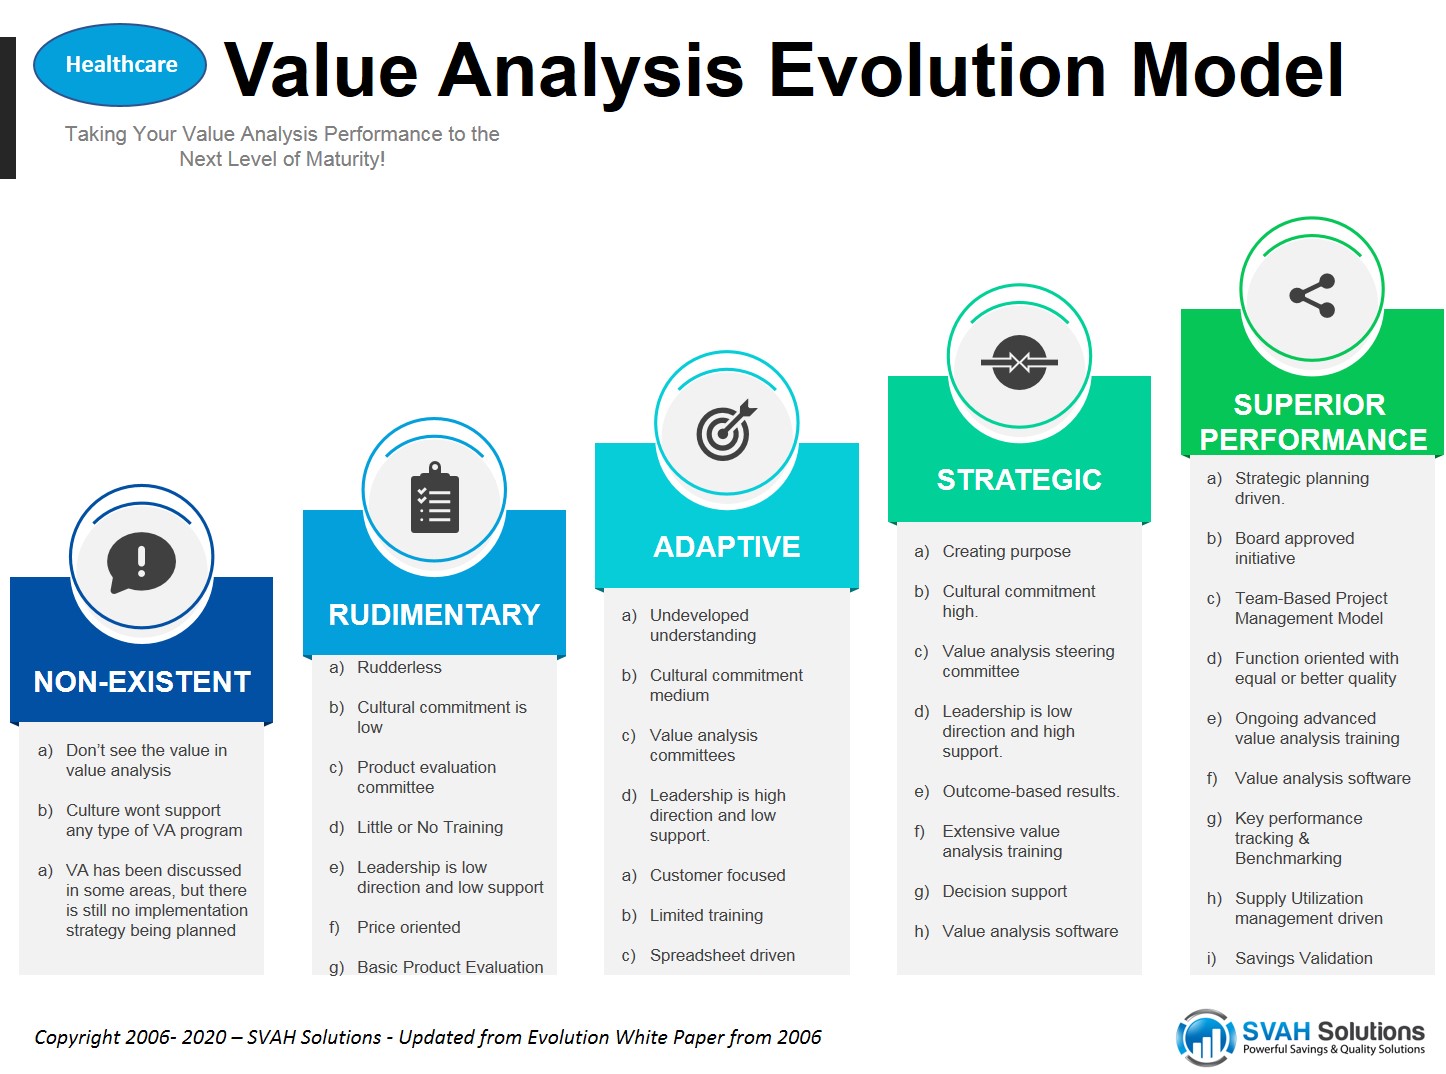 Healthcare Value Analysis Evolution SVAH Solutions